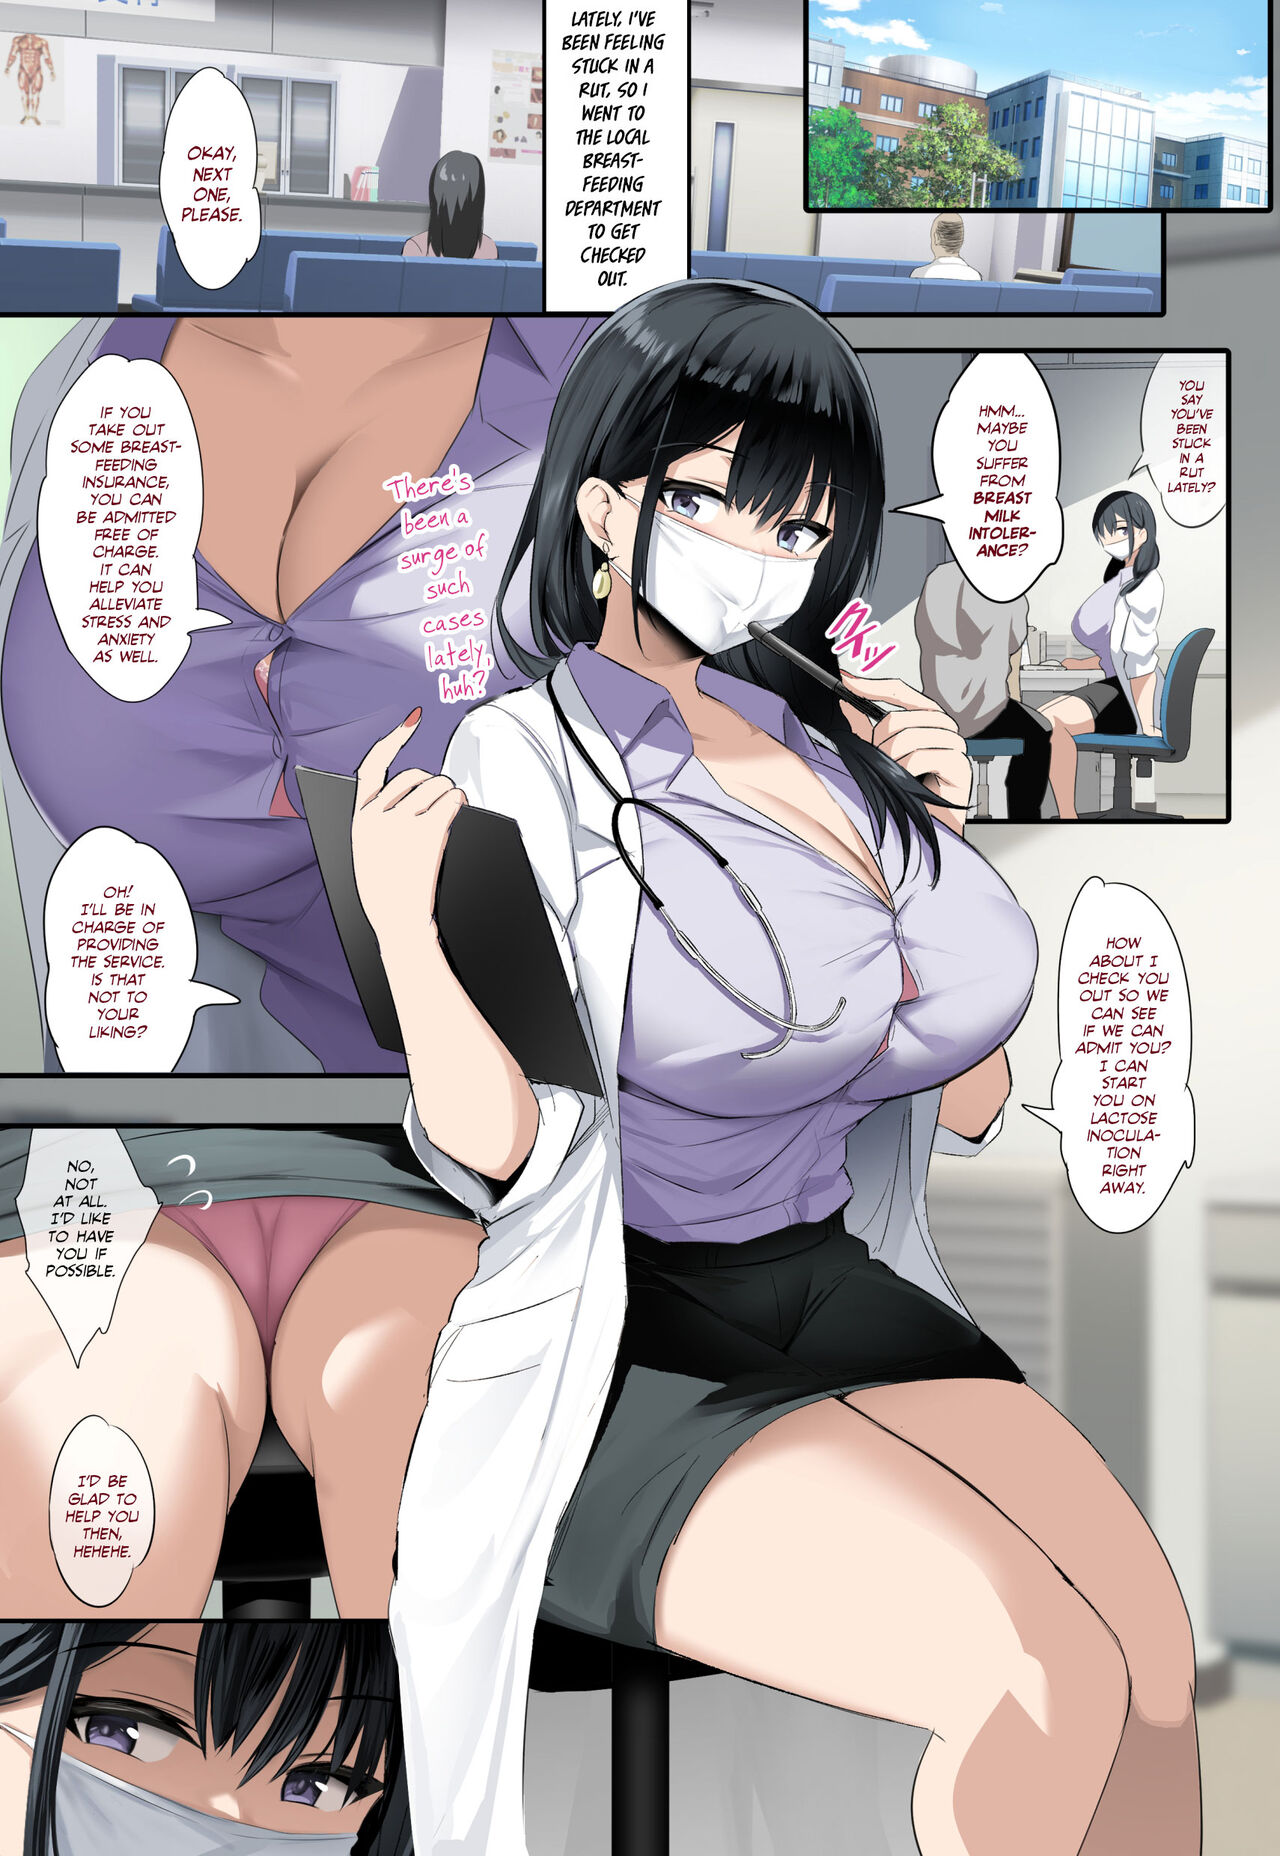 Hentai Manga Comic-The story of how I went to the breastfeeding department to drink breast milk and get myself back into shape-Read-2